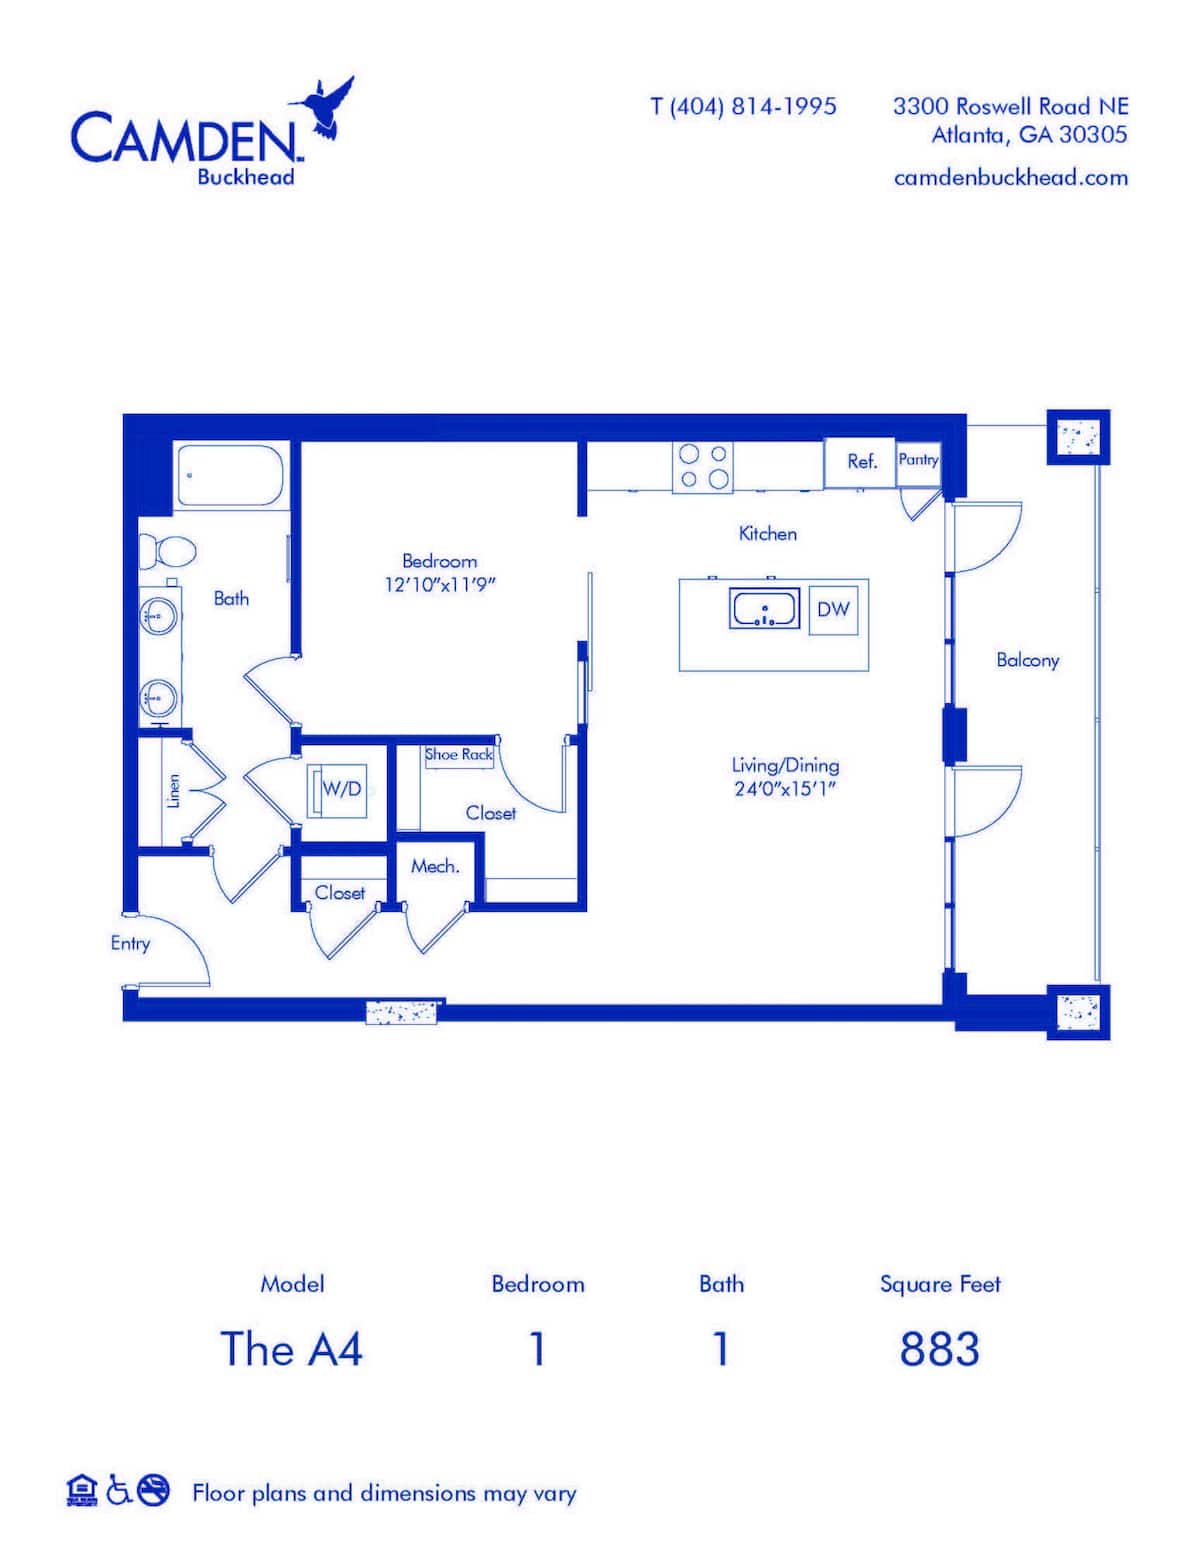 Floorplan diagram for The A4, showing 1 bedroom